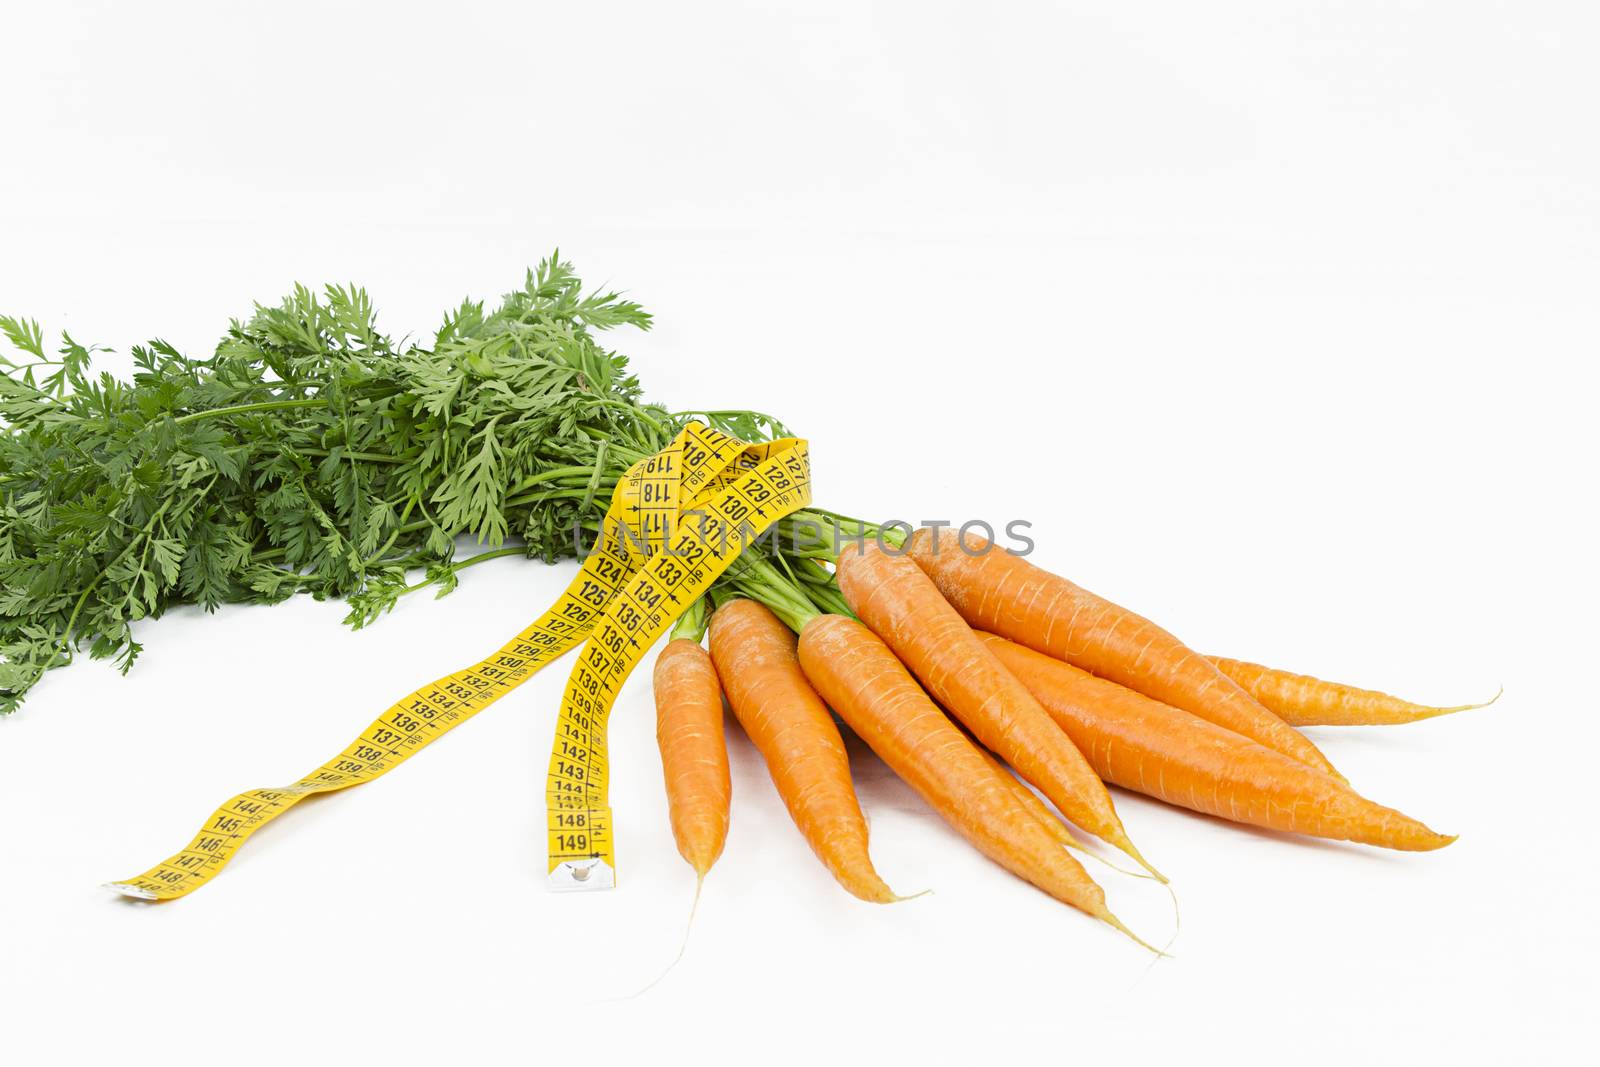 Vegetarian diet to reduce weight. A bunch of freshly picked carrots wrapped in a body measuring tape ruler which symbolizes the waistline